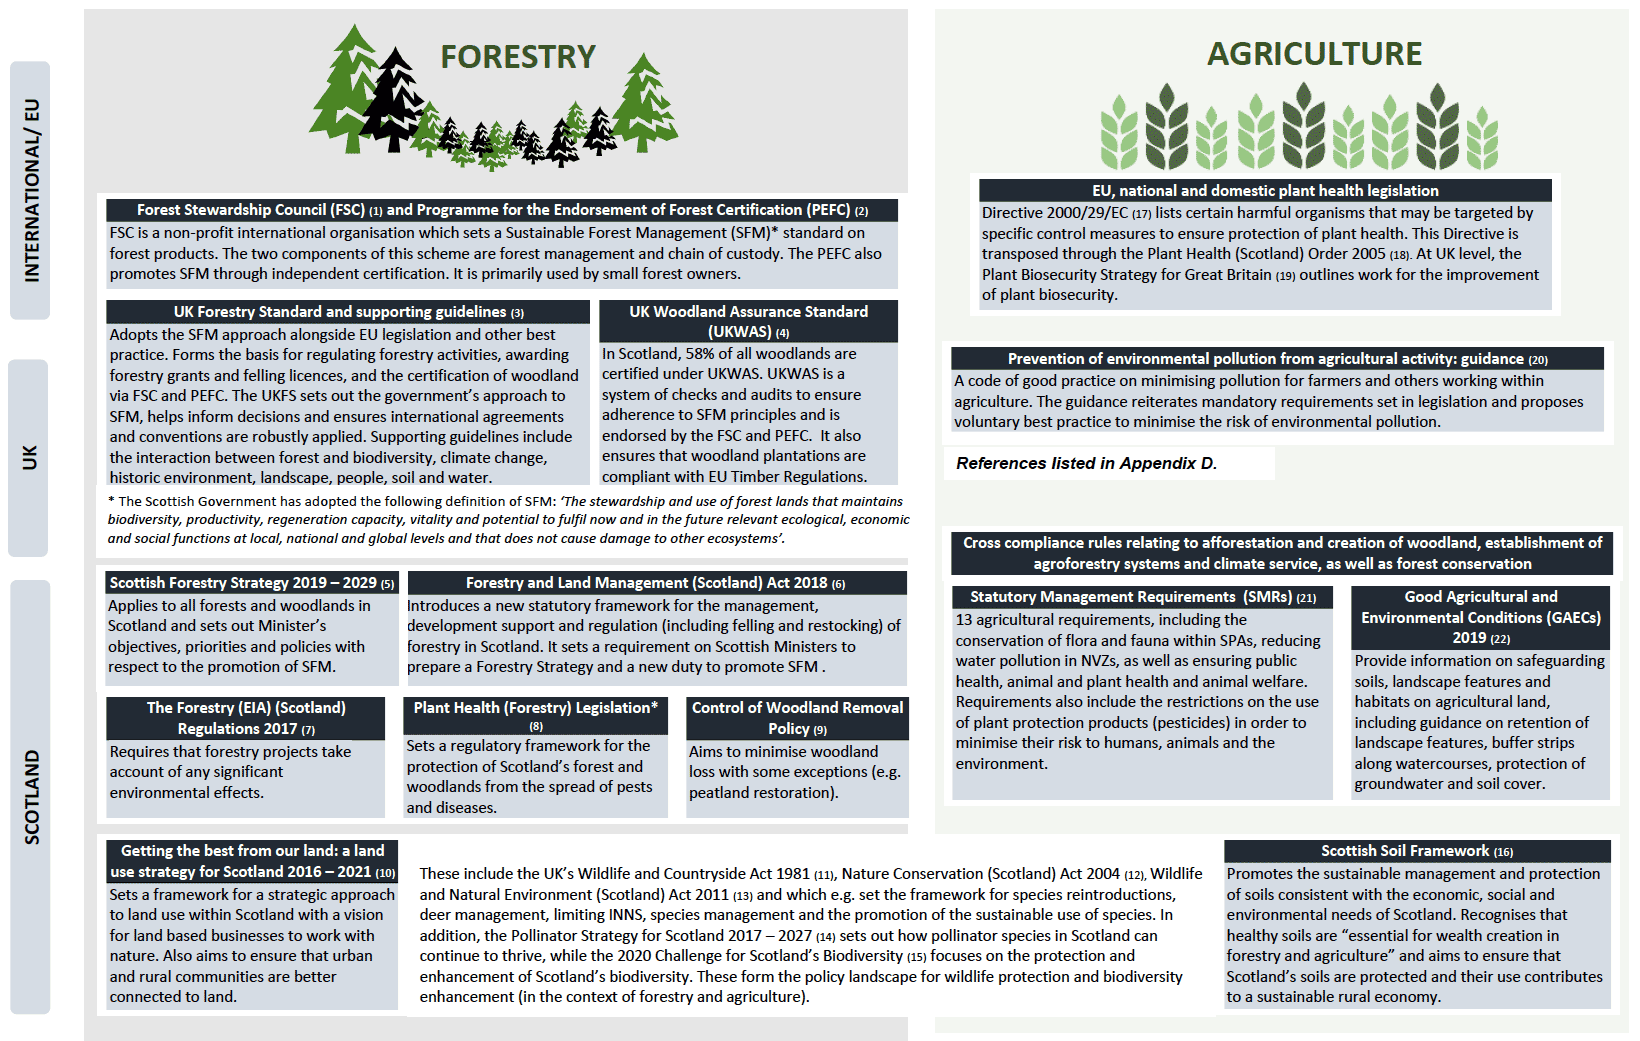 Figure 3: Environmental objectives for rural assets (forestry and agriculture)